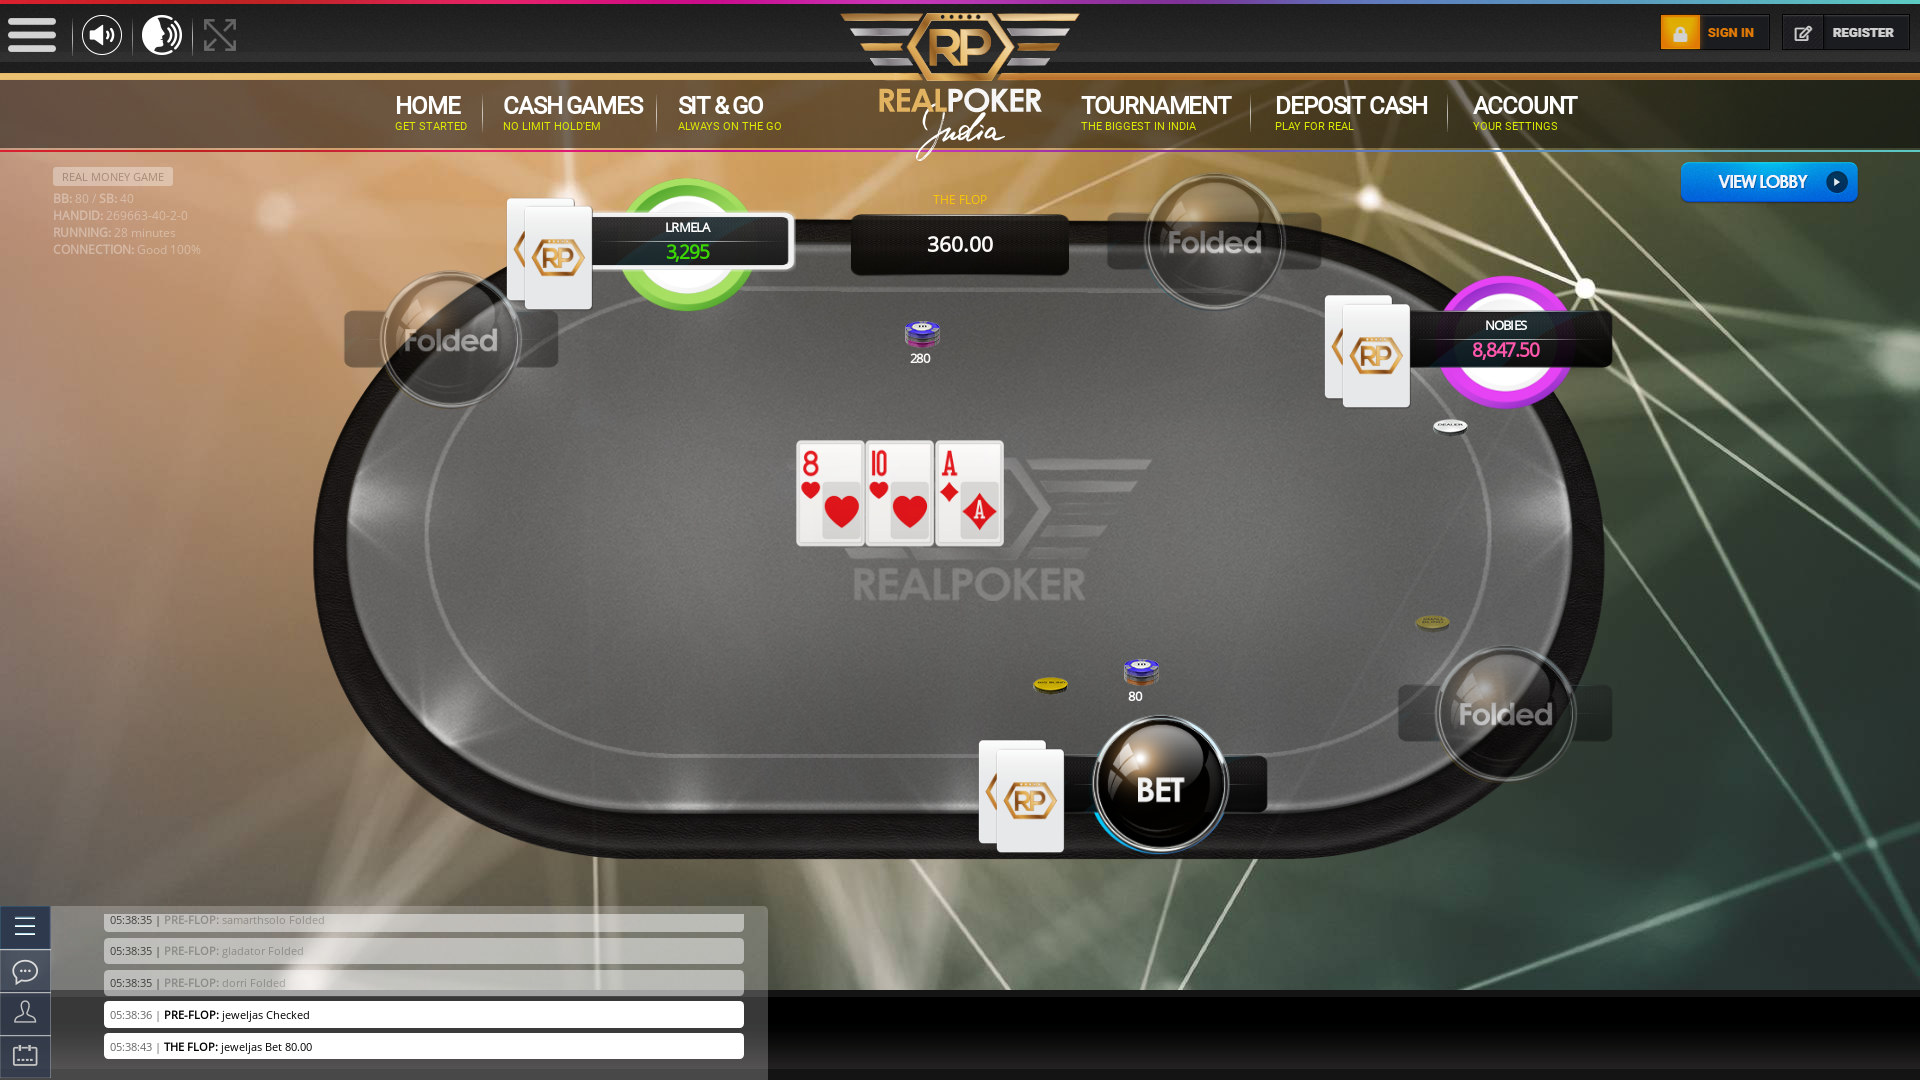 Real poker 10 player table in the 28th minute